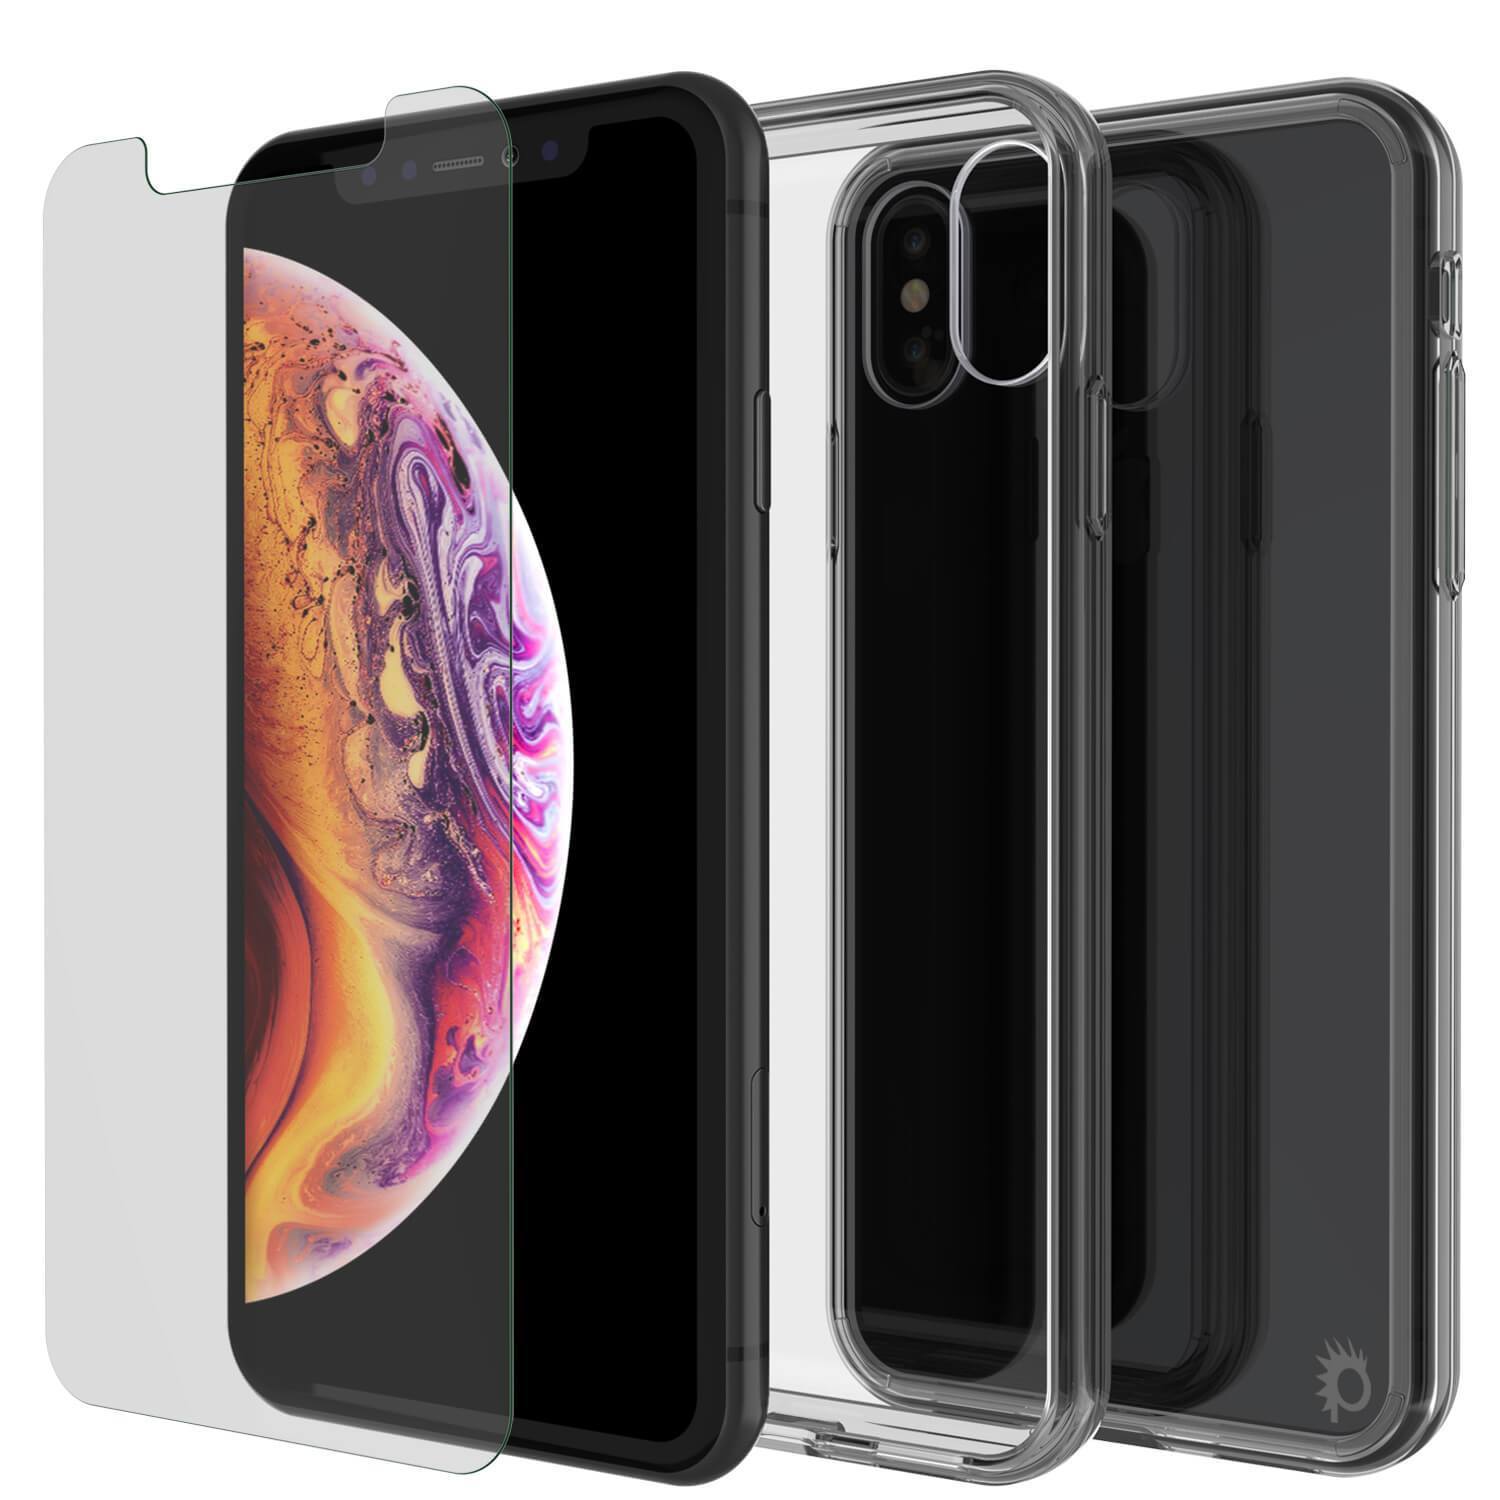 iPhone XS Case, PUNKcase [Lucid 2.0 Series] [Slim Fit] Armor Cover [Crystal-Black]